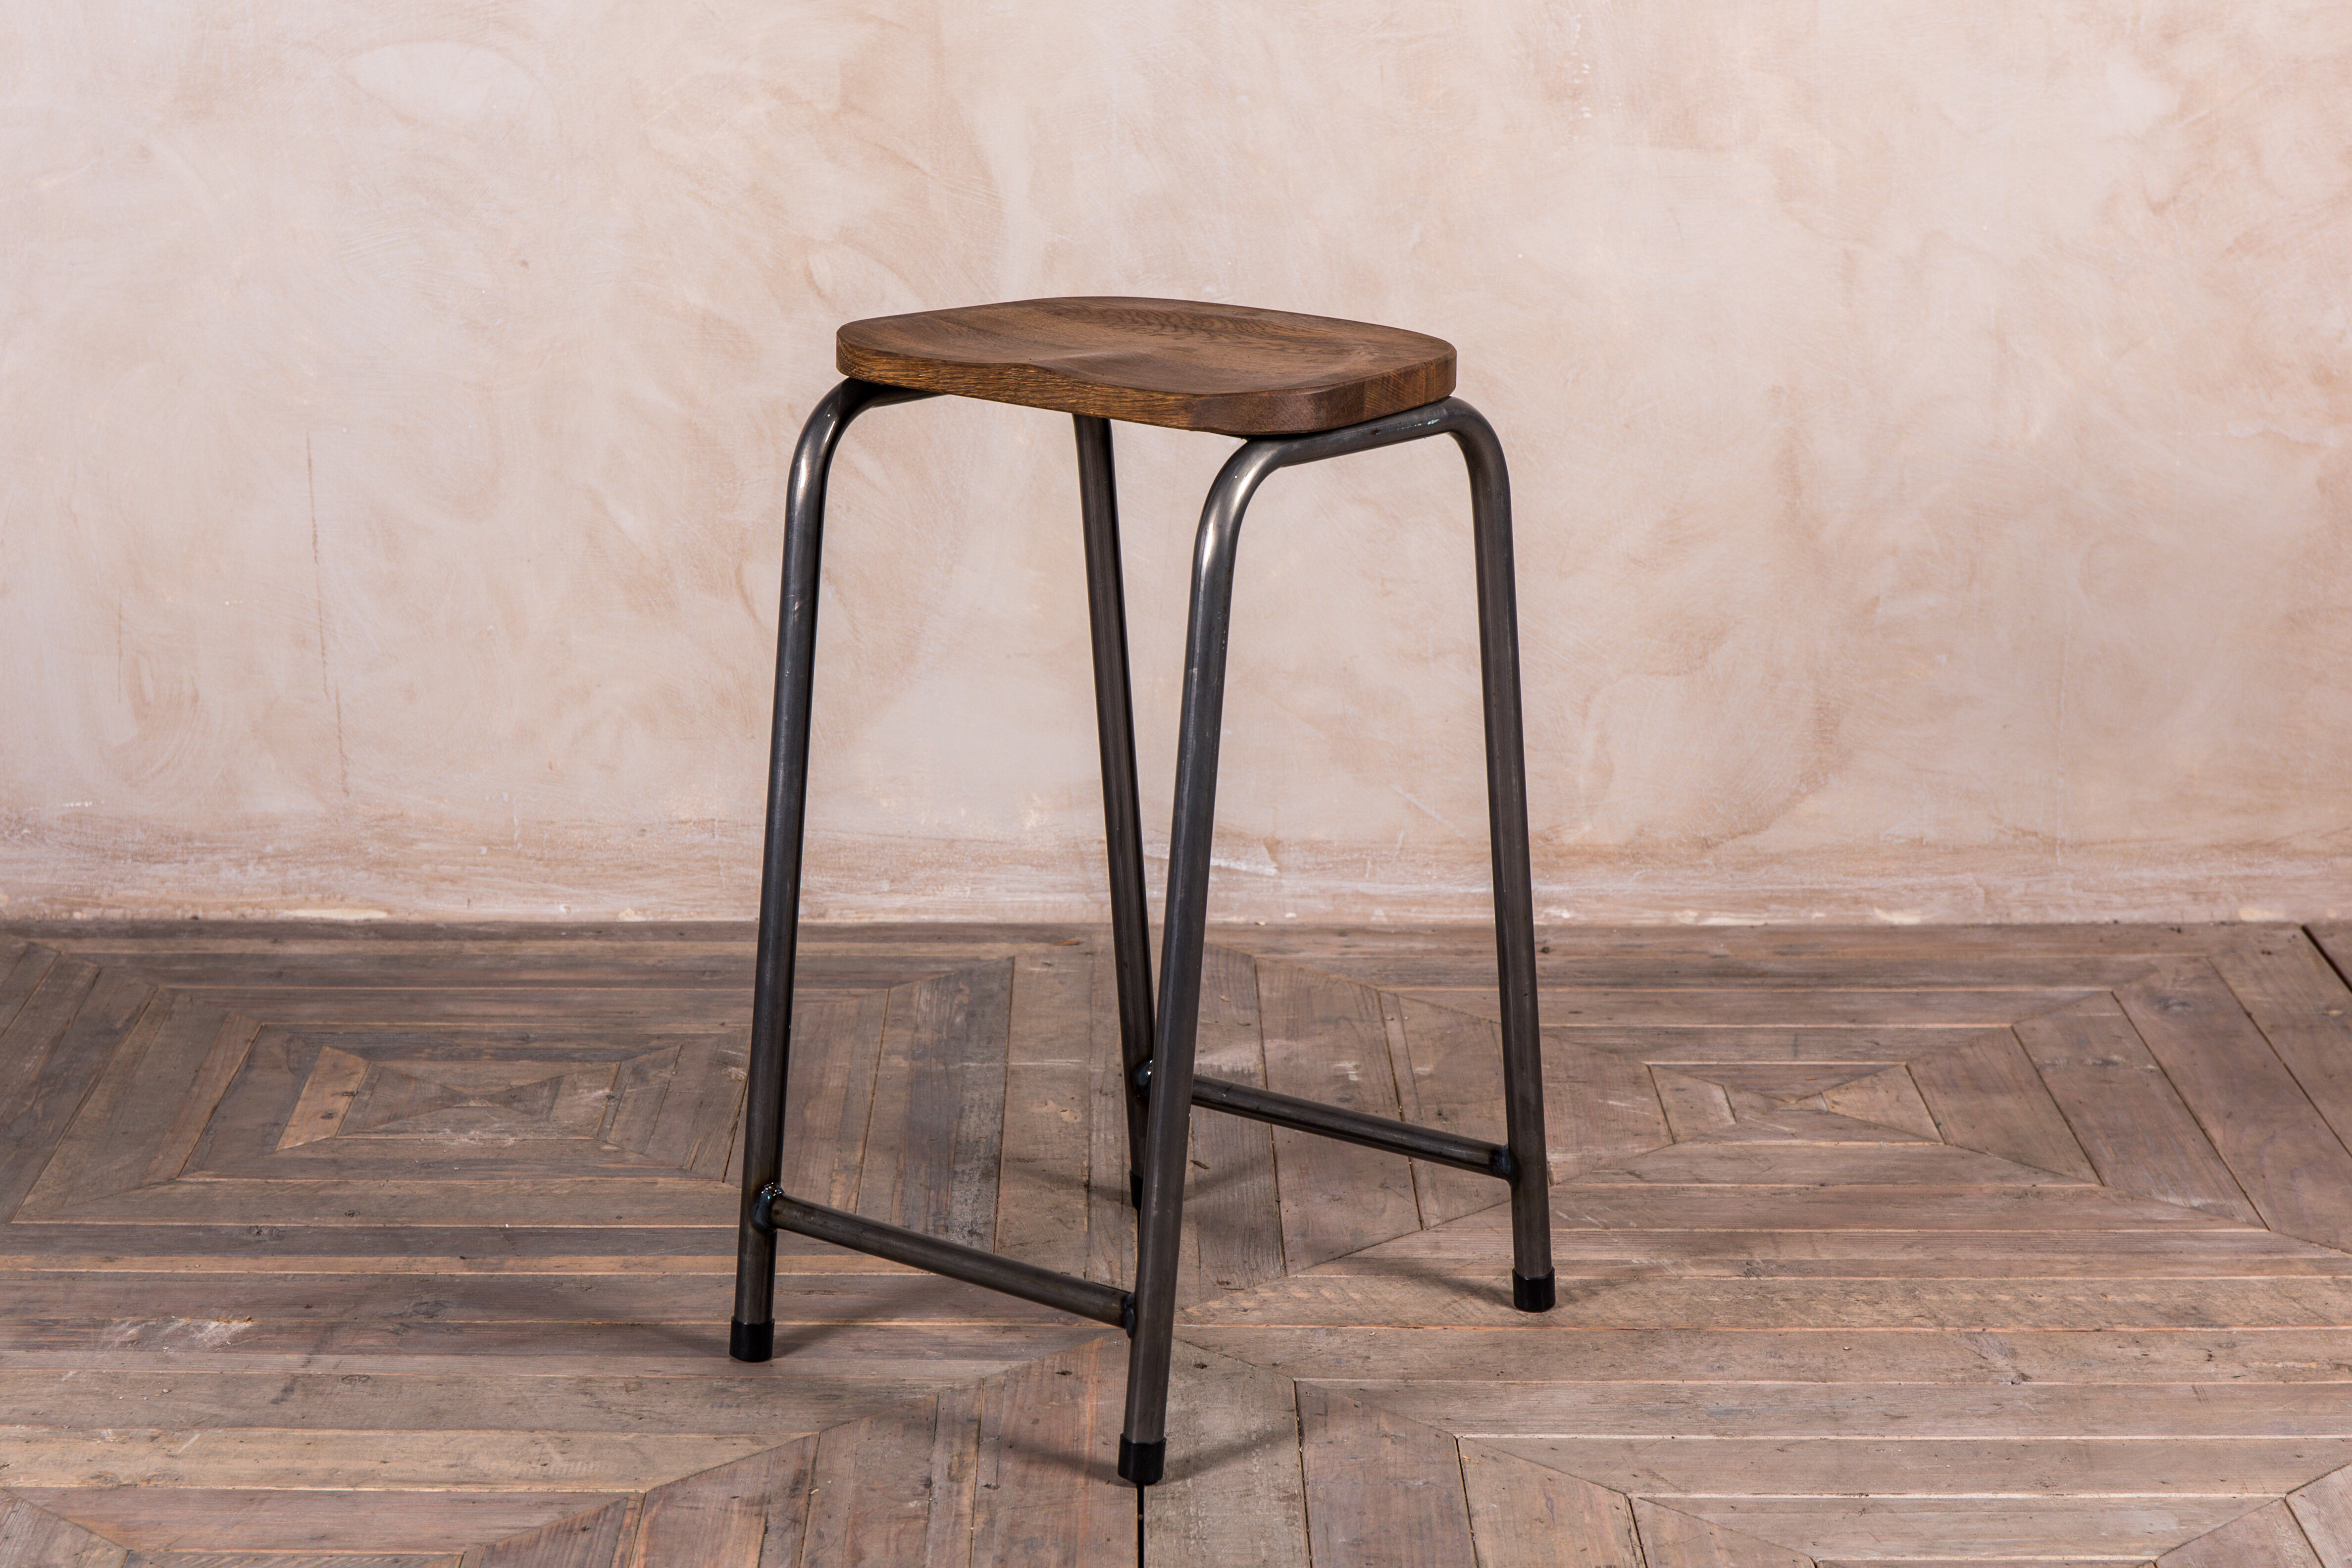 INDUSTRIAL STYLE STACKING STOOL  BREAKFAST BAR STOOL STACKABLE BAR STOOLSS 